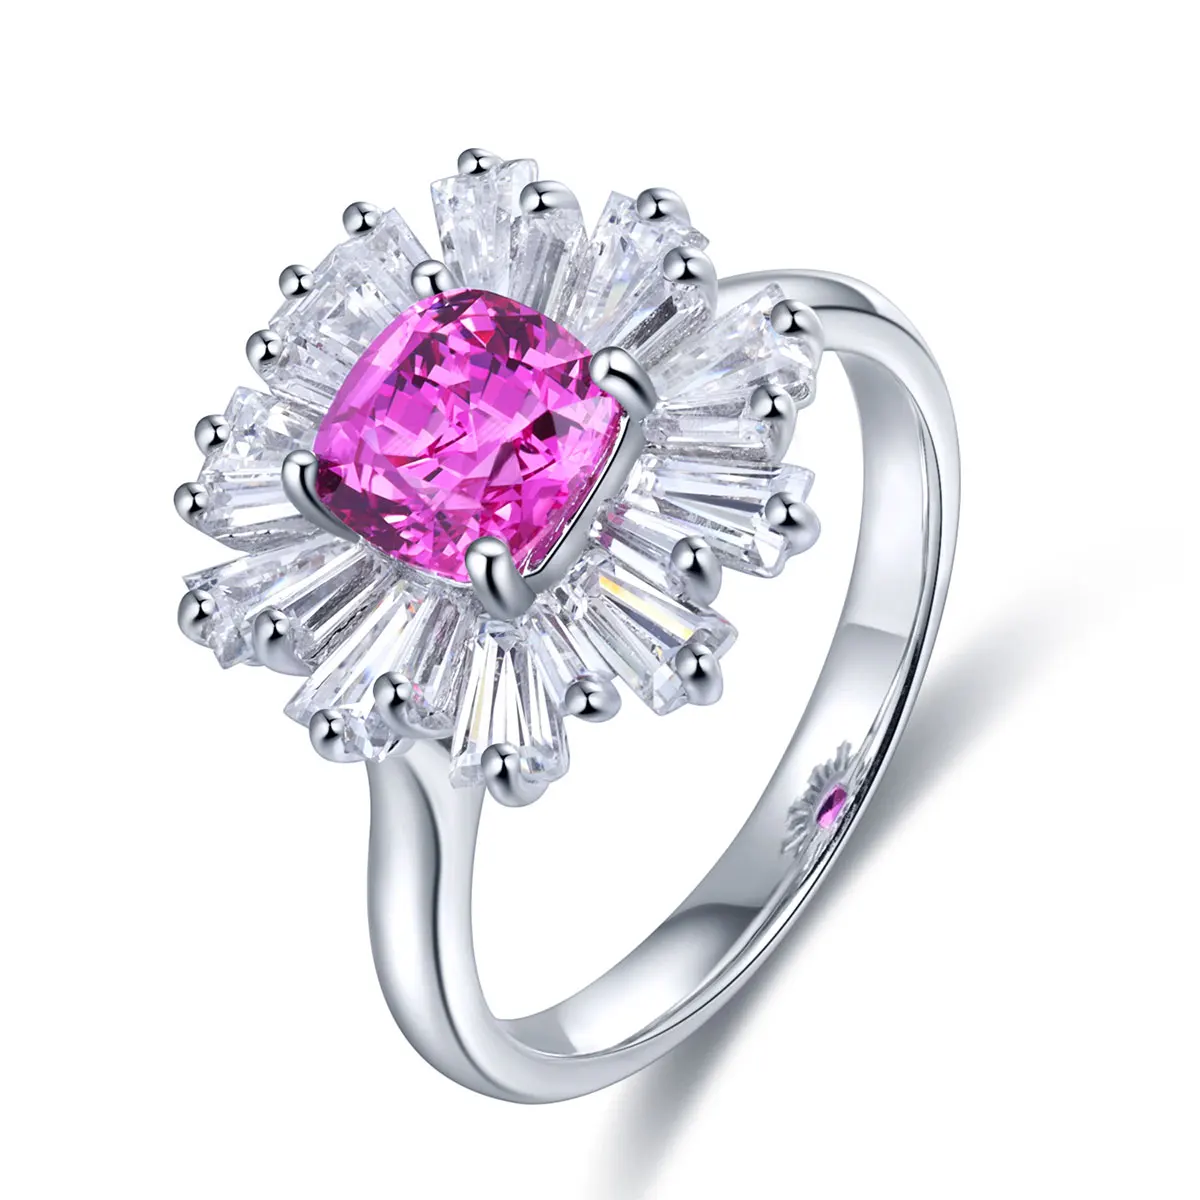 

High quality 1.50ct Flower pattern Lab Grown Ruby gemstone rings sterling silver 925 jewelry adjustable ring, Pink